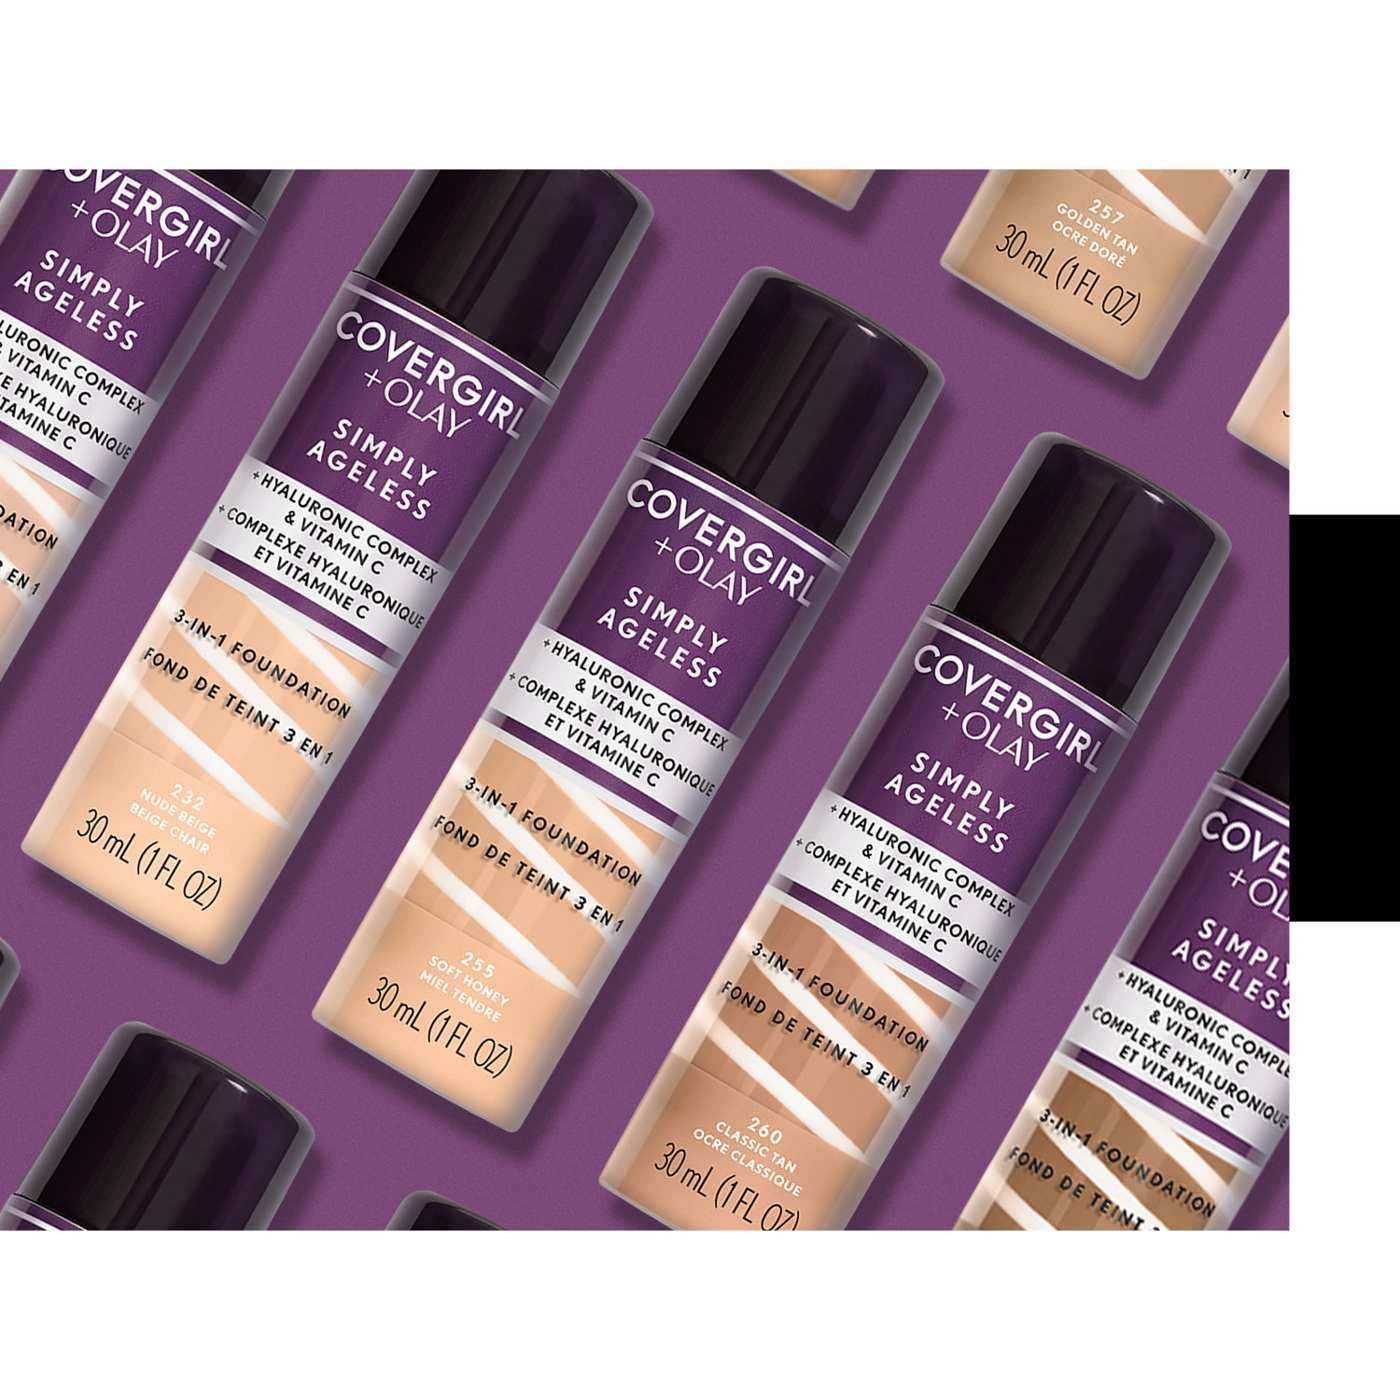 Covergirl Simply Ageless 3-in-1 Liquid Foundation 255 Soft Honey; image 4 of 6